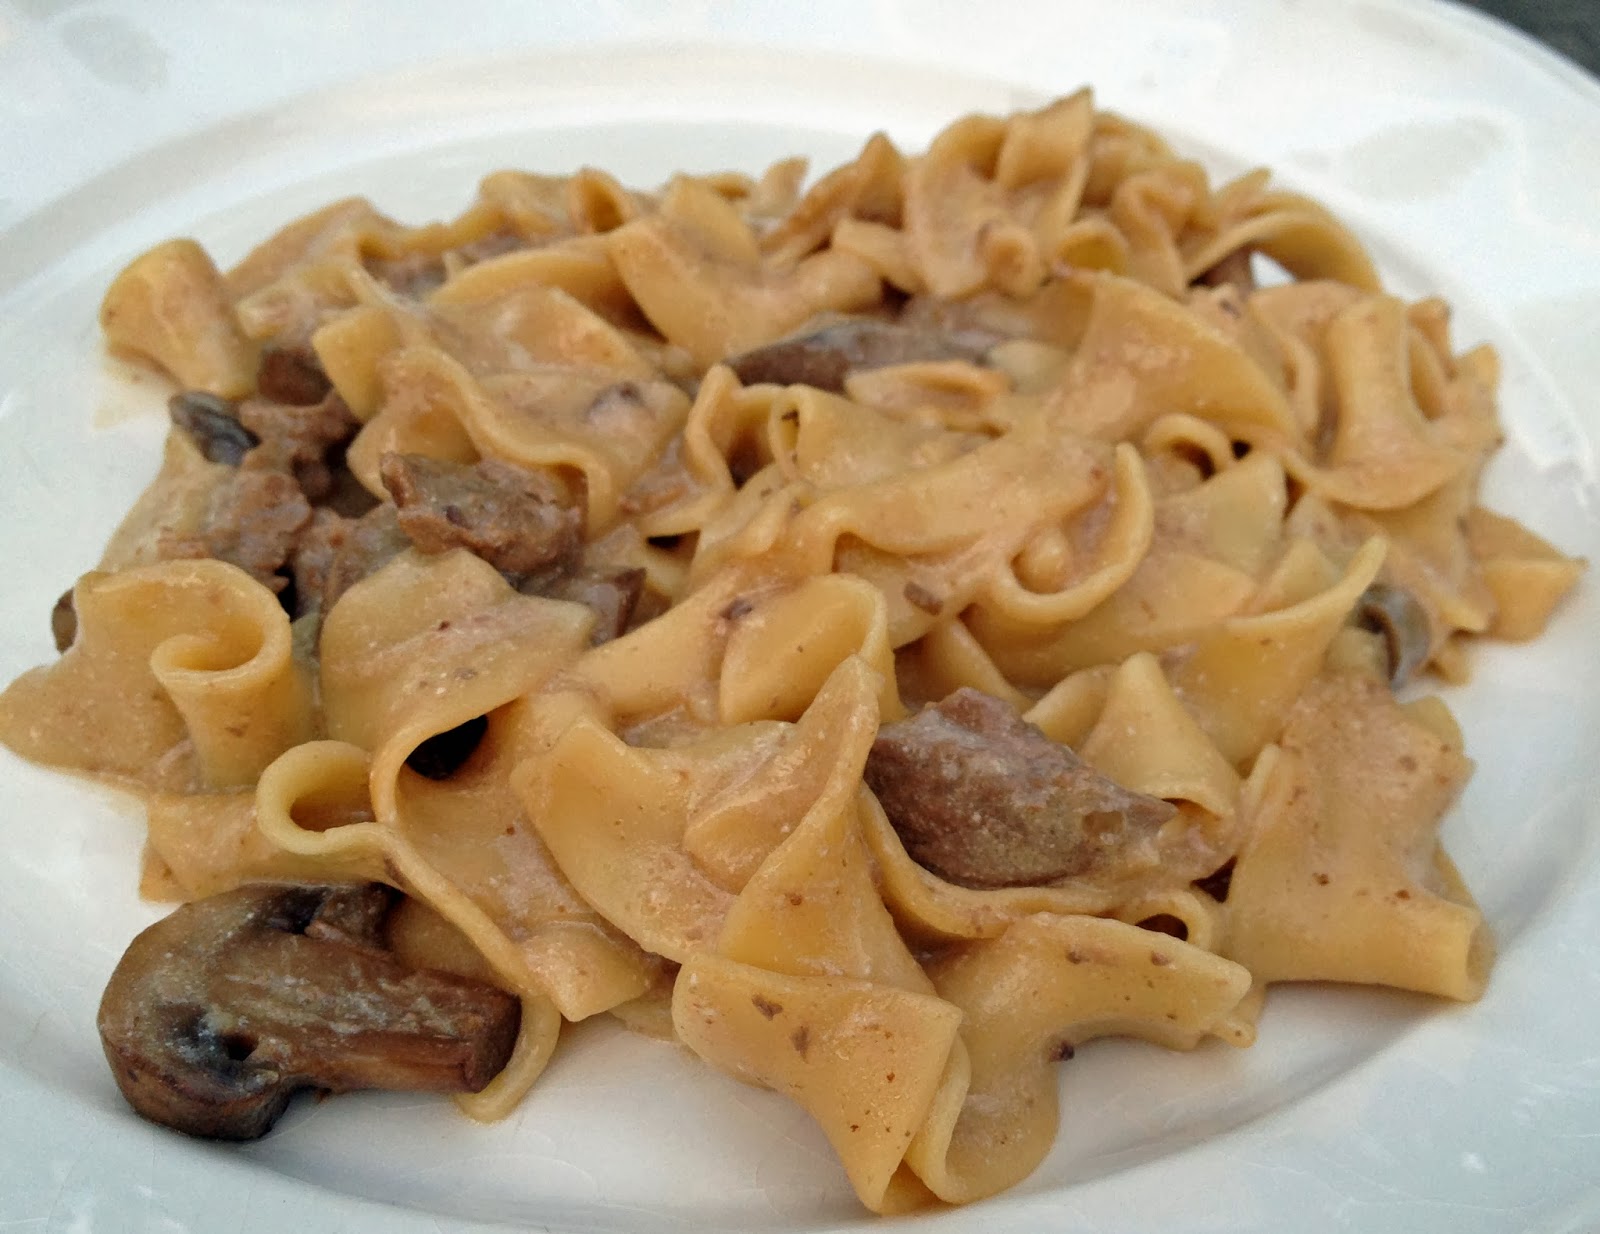 Controlling My Chaos Liane S Famous Beef Stroganoff,Farm To Table Cookbook